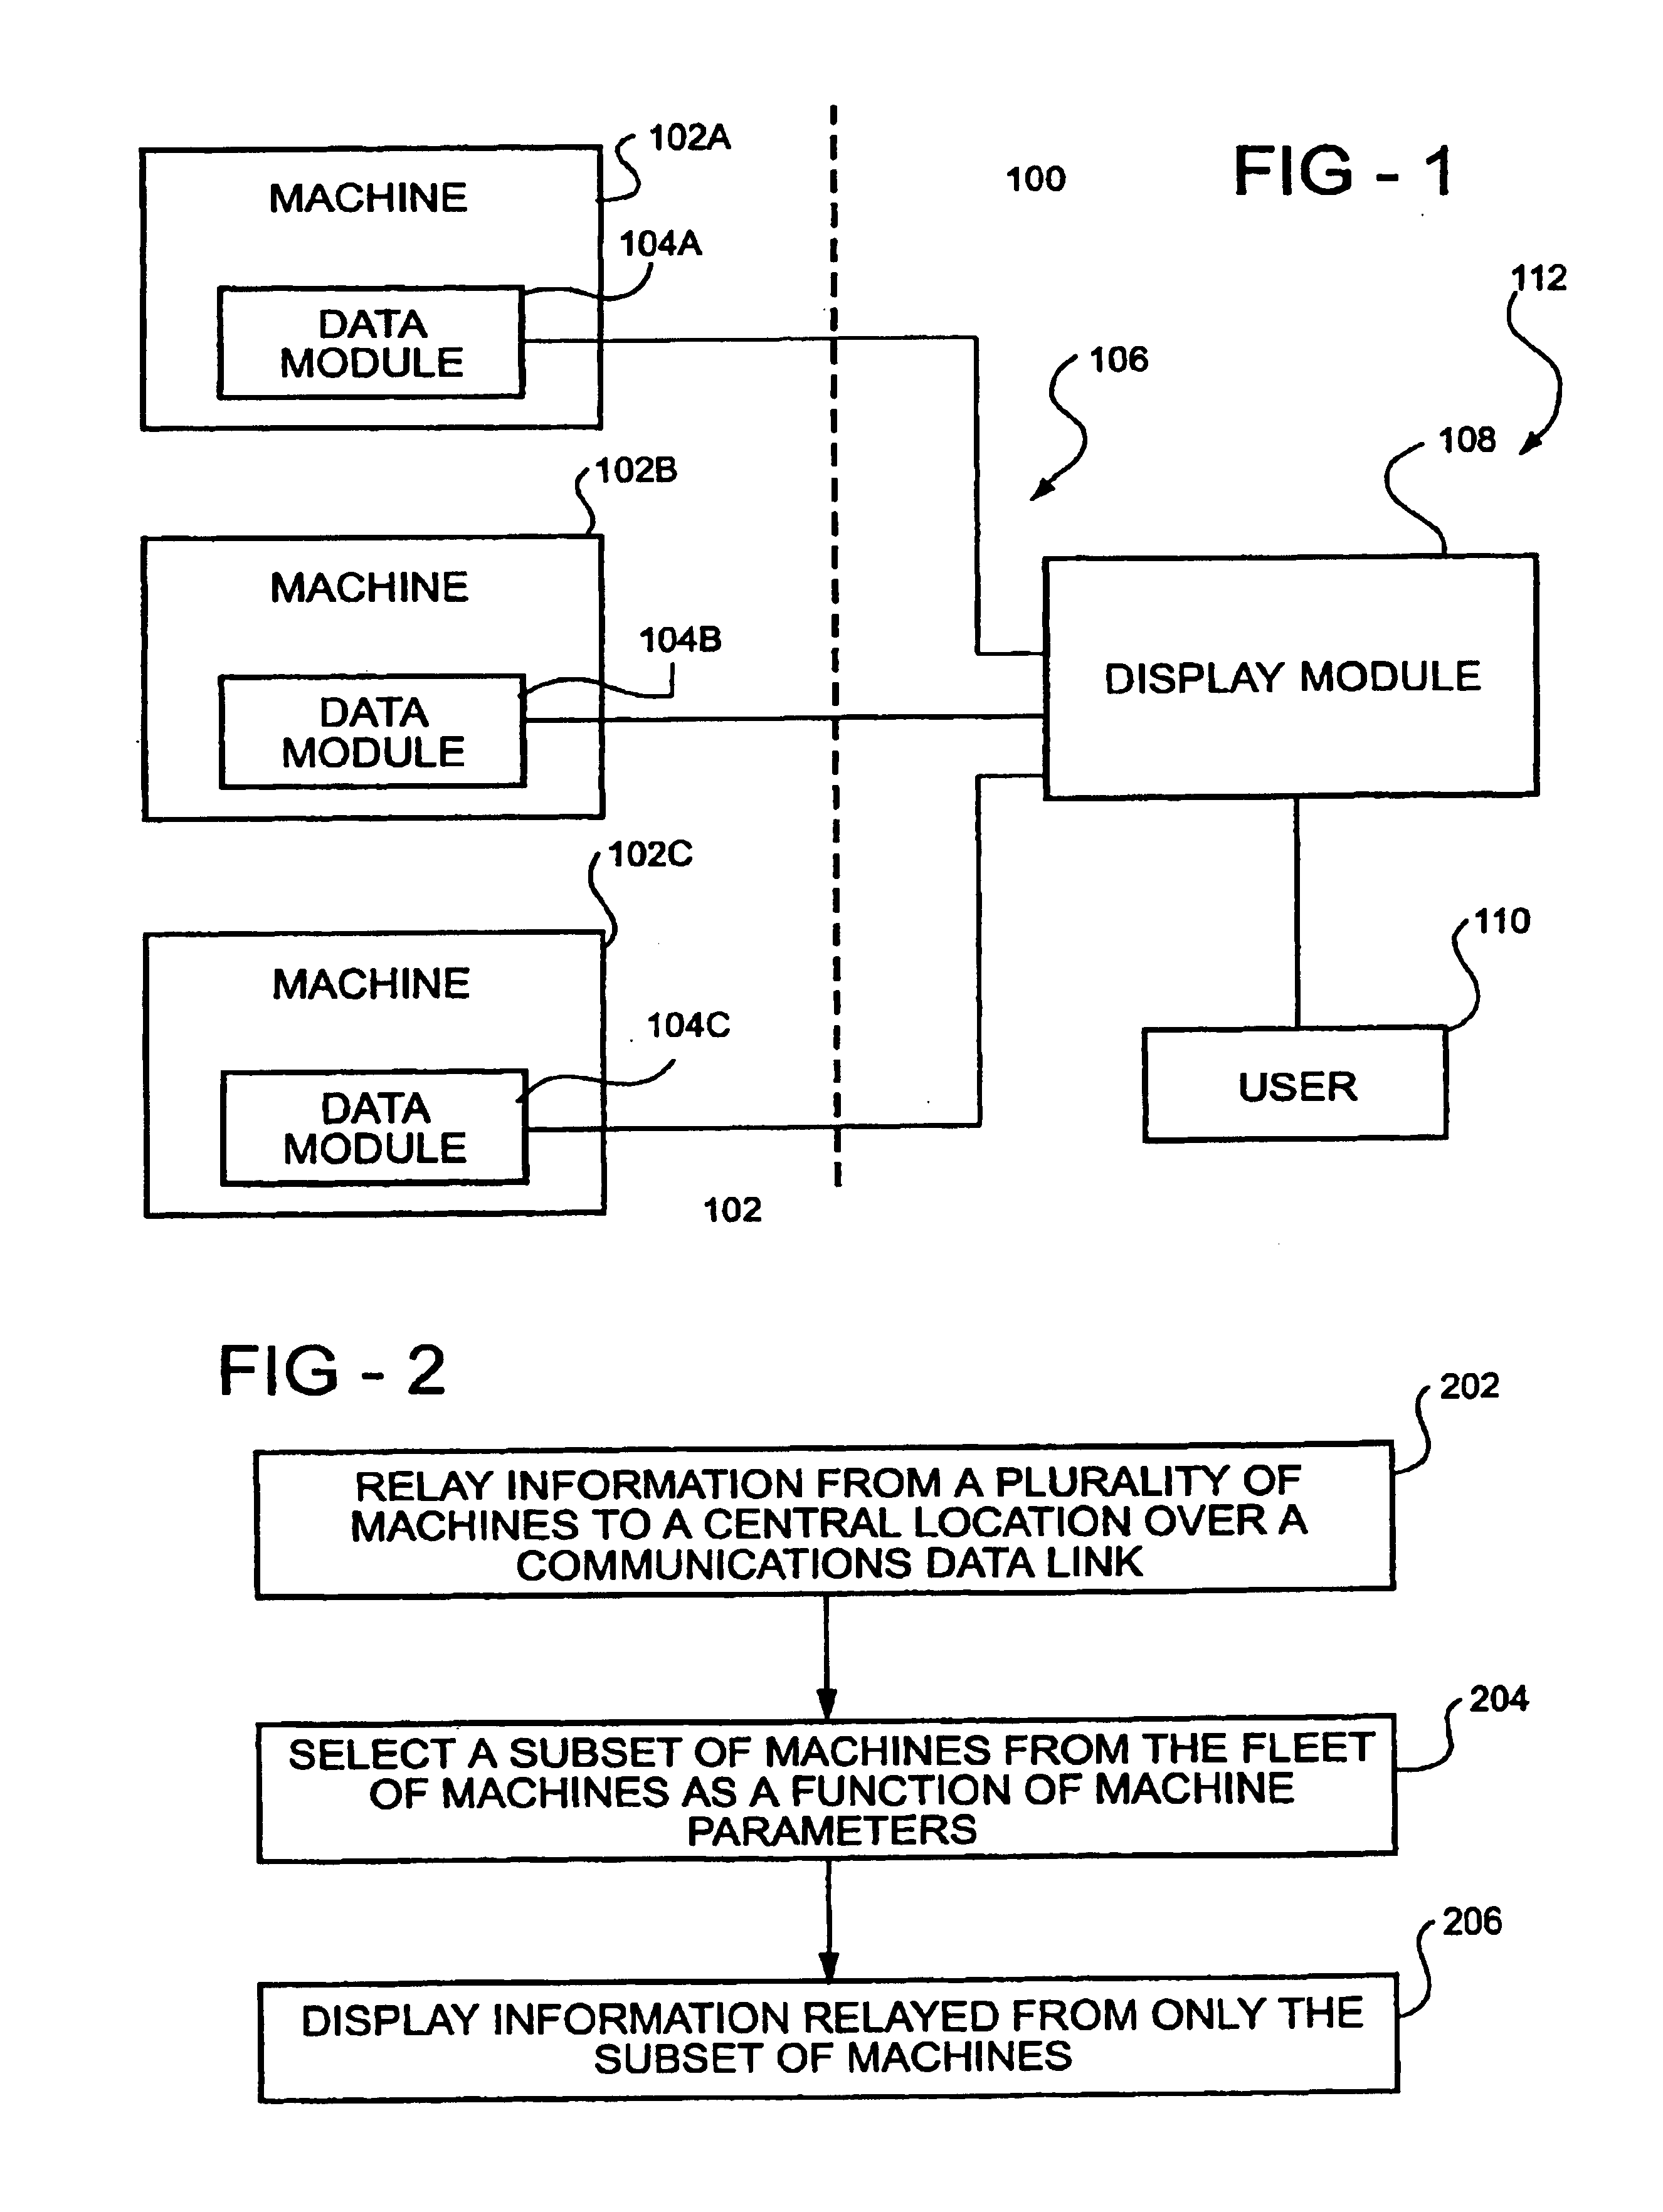 Apparatus and method for displaying information related to a machine